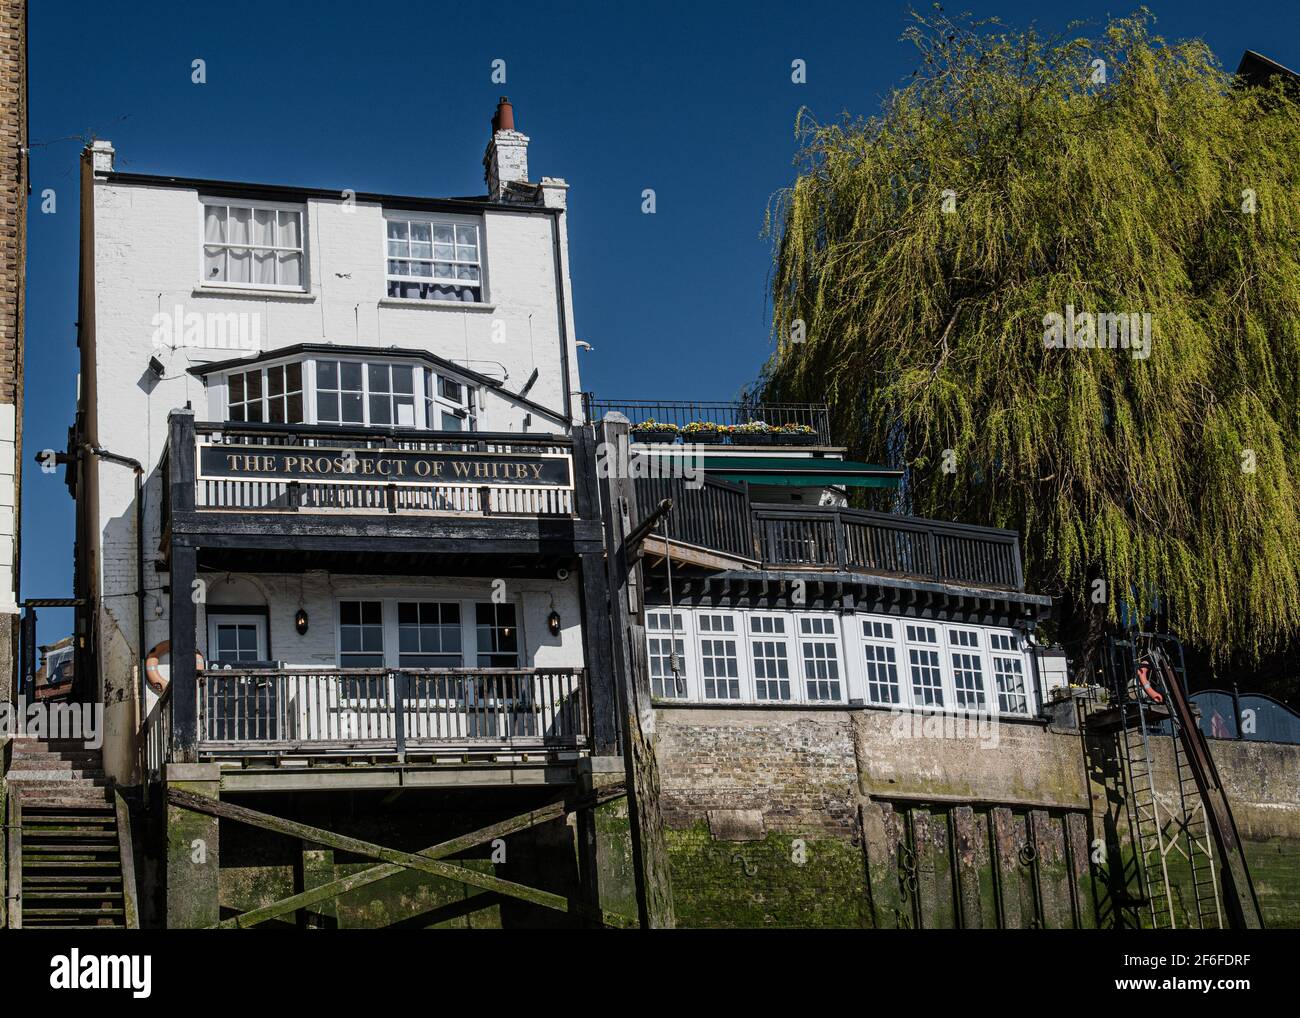 The Prospect of Whitby Pub, Wapping, London, UK Stock Photo